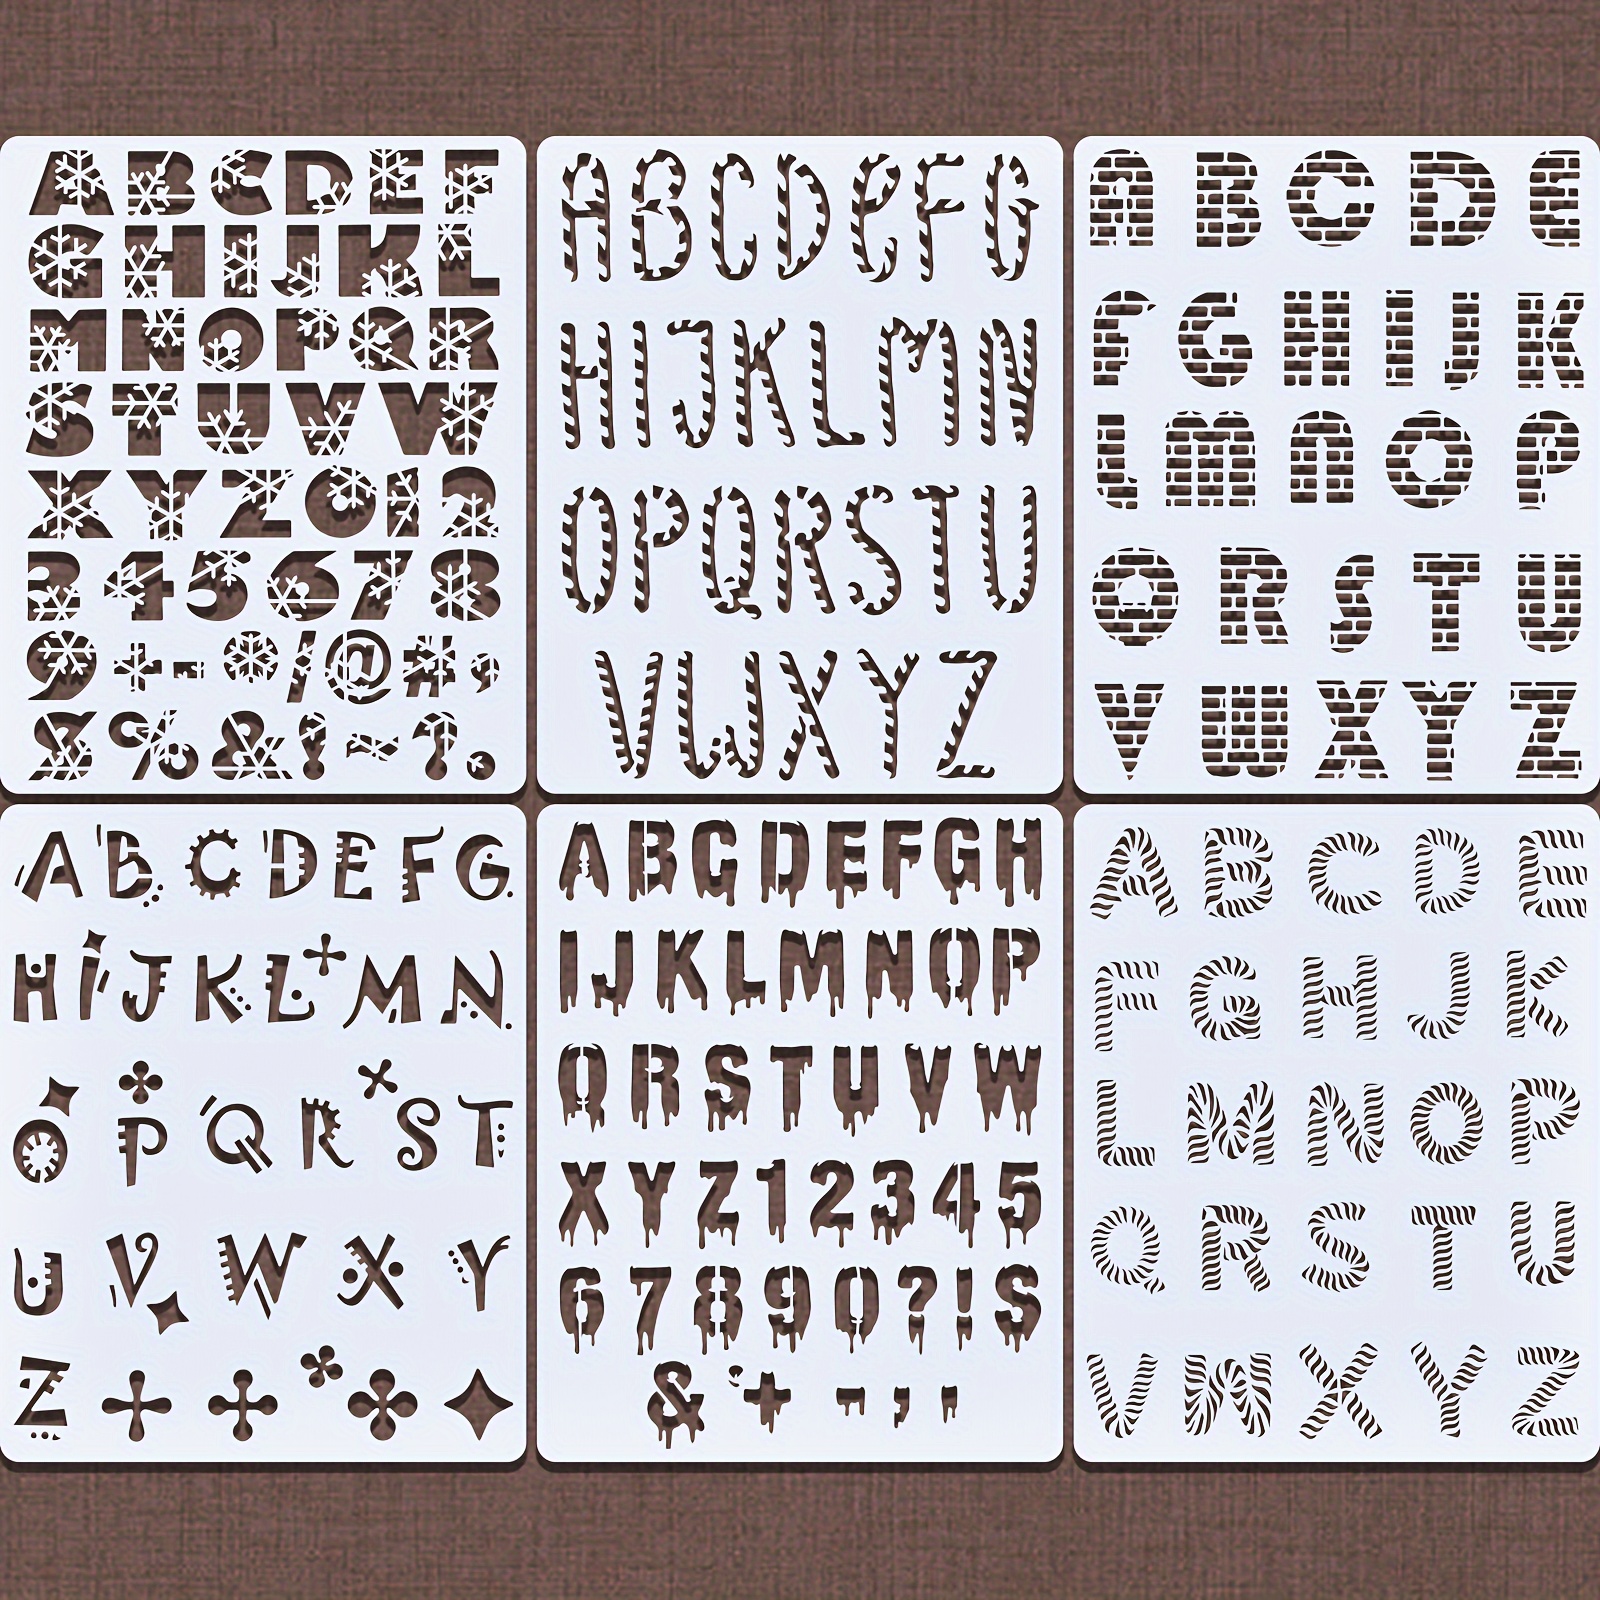 2 Inch Alphabet Letter Stencils Kit, 42 Pcs Reusable Interlocking Plastic  Letter Templates and Number Stencils for Painting on Wood, Wall, Fabric,  Rock, Chalkboard, Signage, and DIY Art Project price in UAE